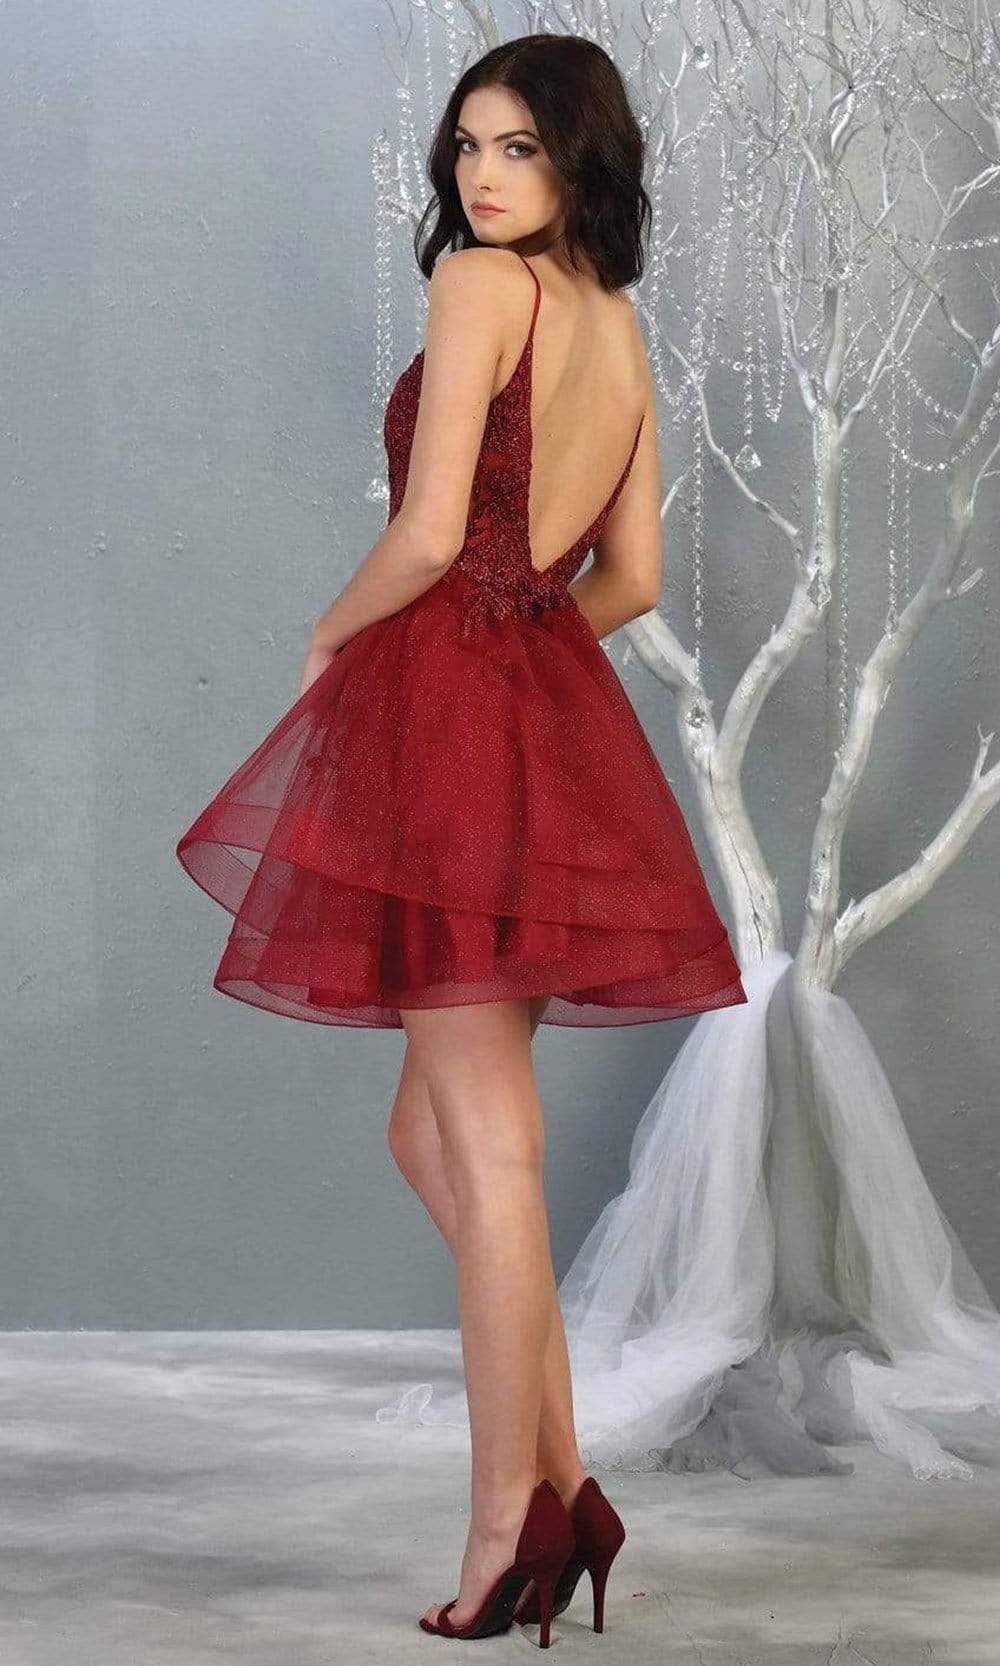 May Queen - MQ1816 Beaded Embellished Tiered Tulle Cocktail Dress Homecoming Dresses 2 / Burgundy